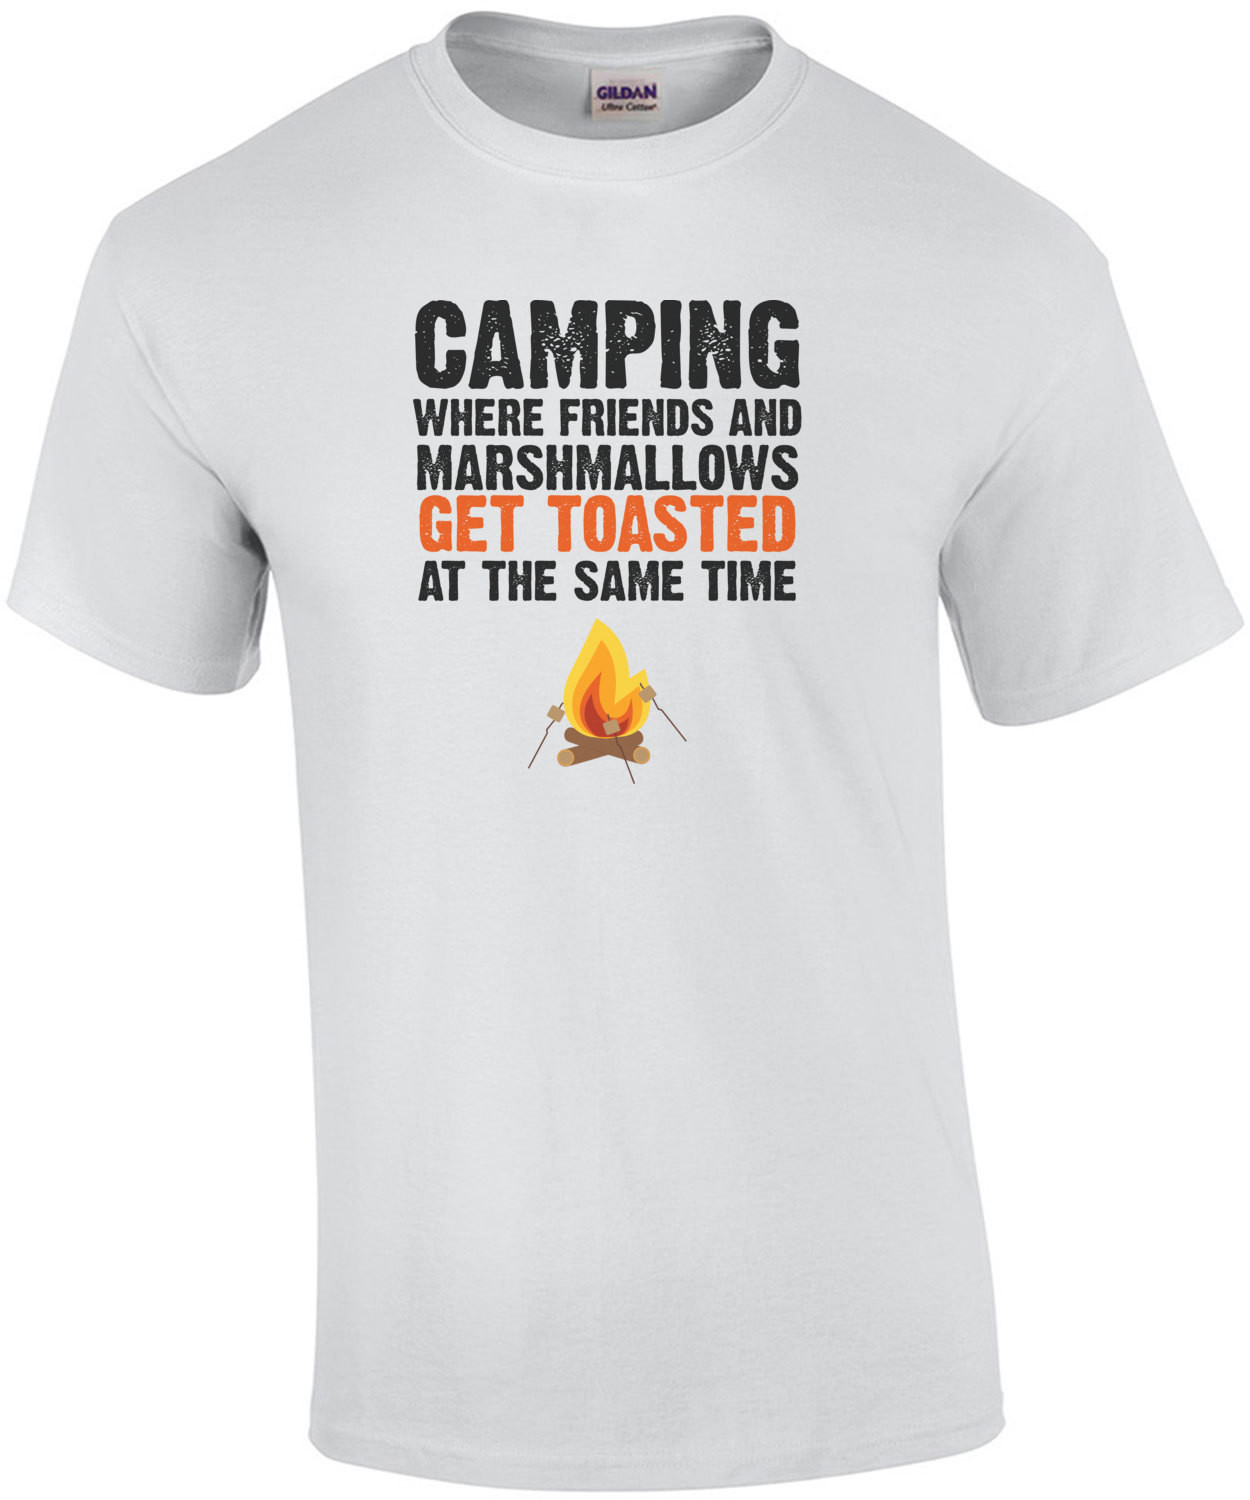 Camping - where friends and marshmallows get toasted at the same time - camping t-shirt